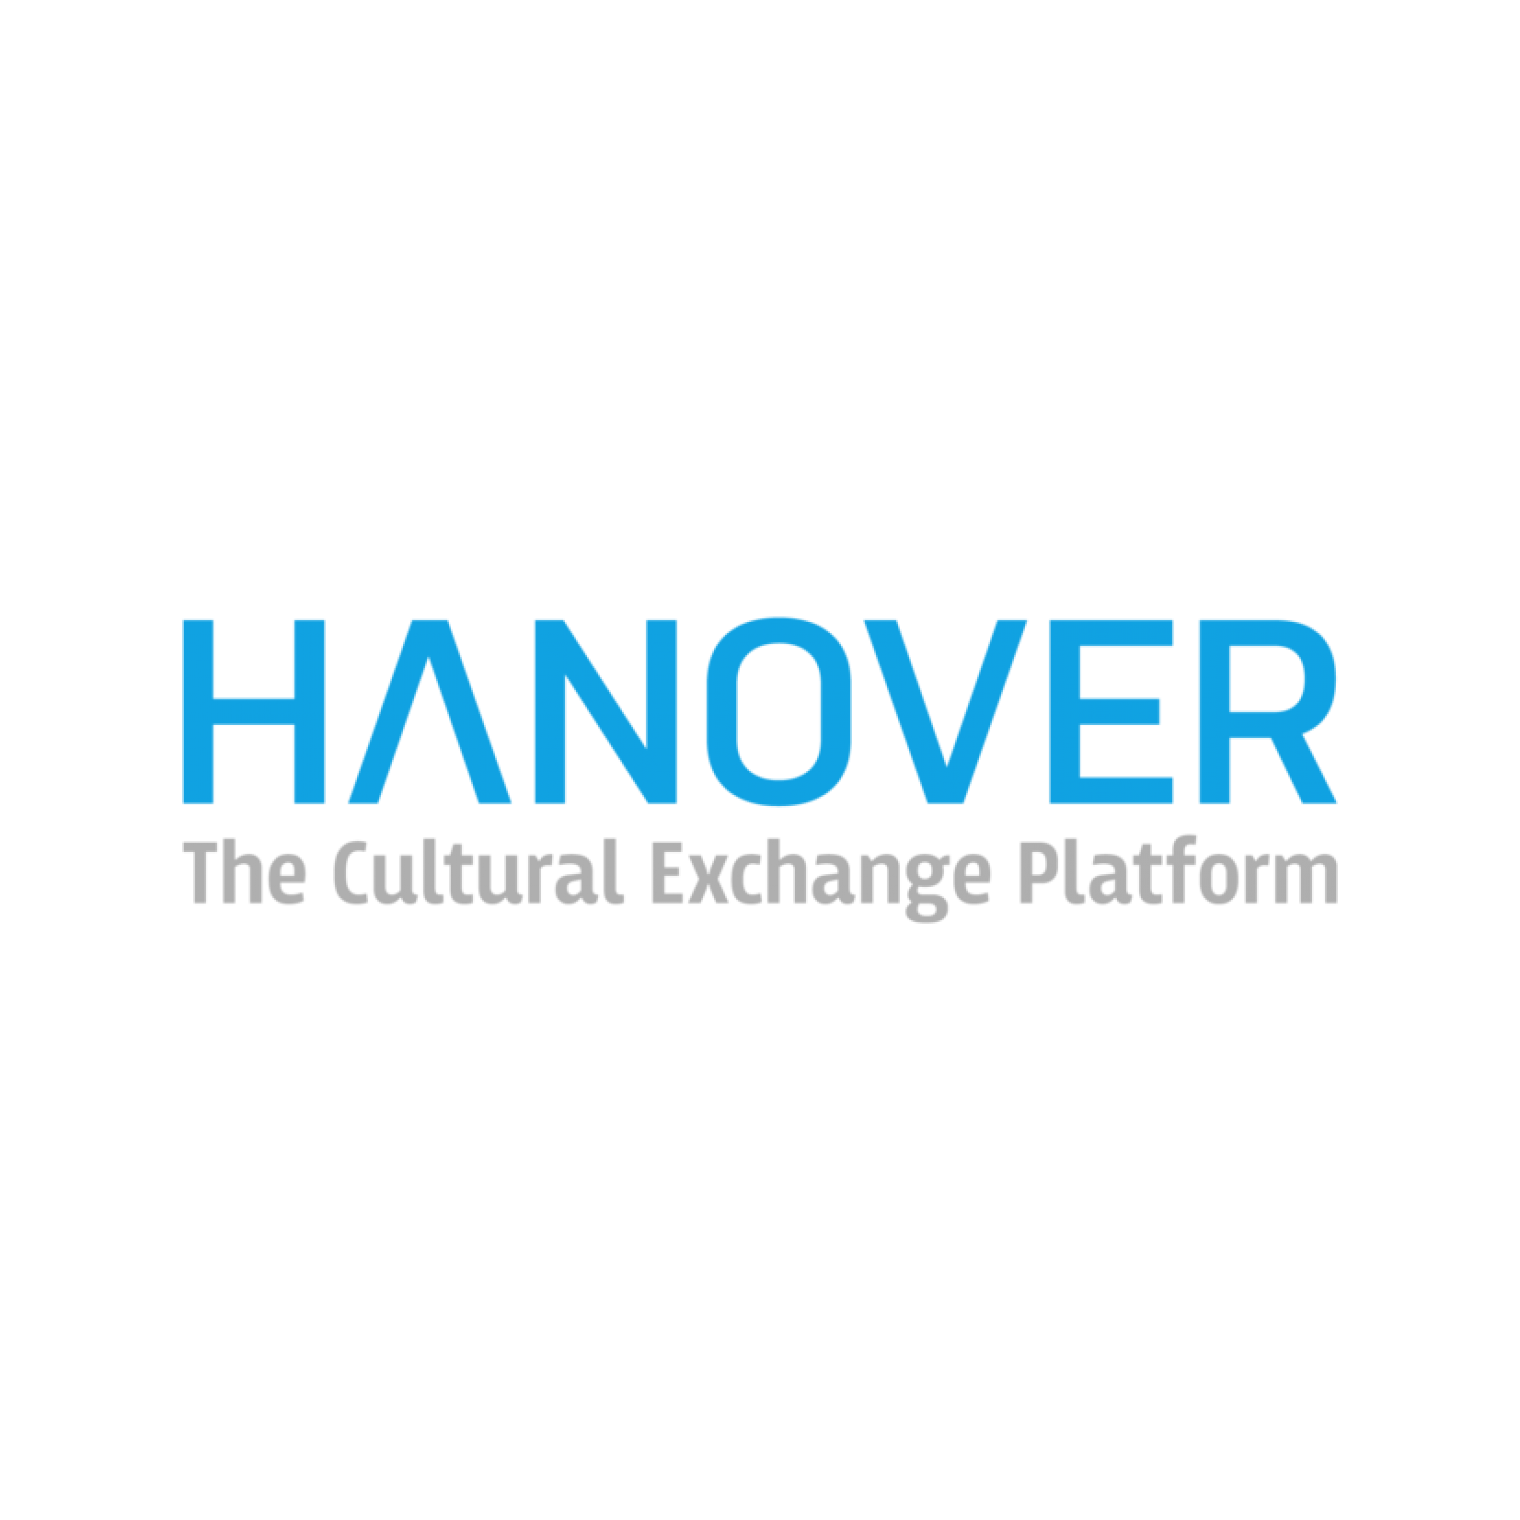 Welcome to our new Associate Member: HANOVER – the Cultural Exchange Platform